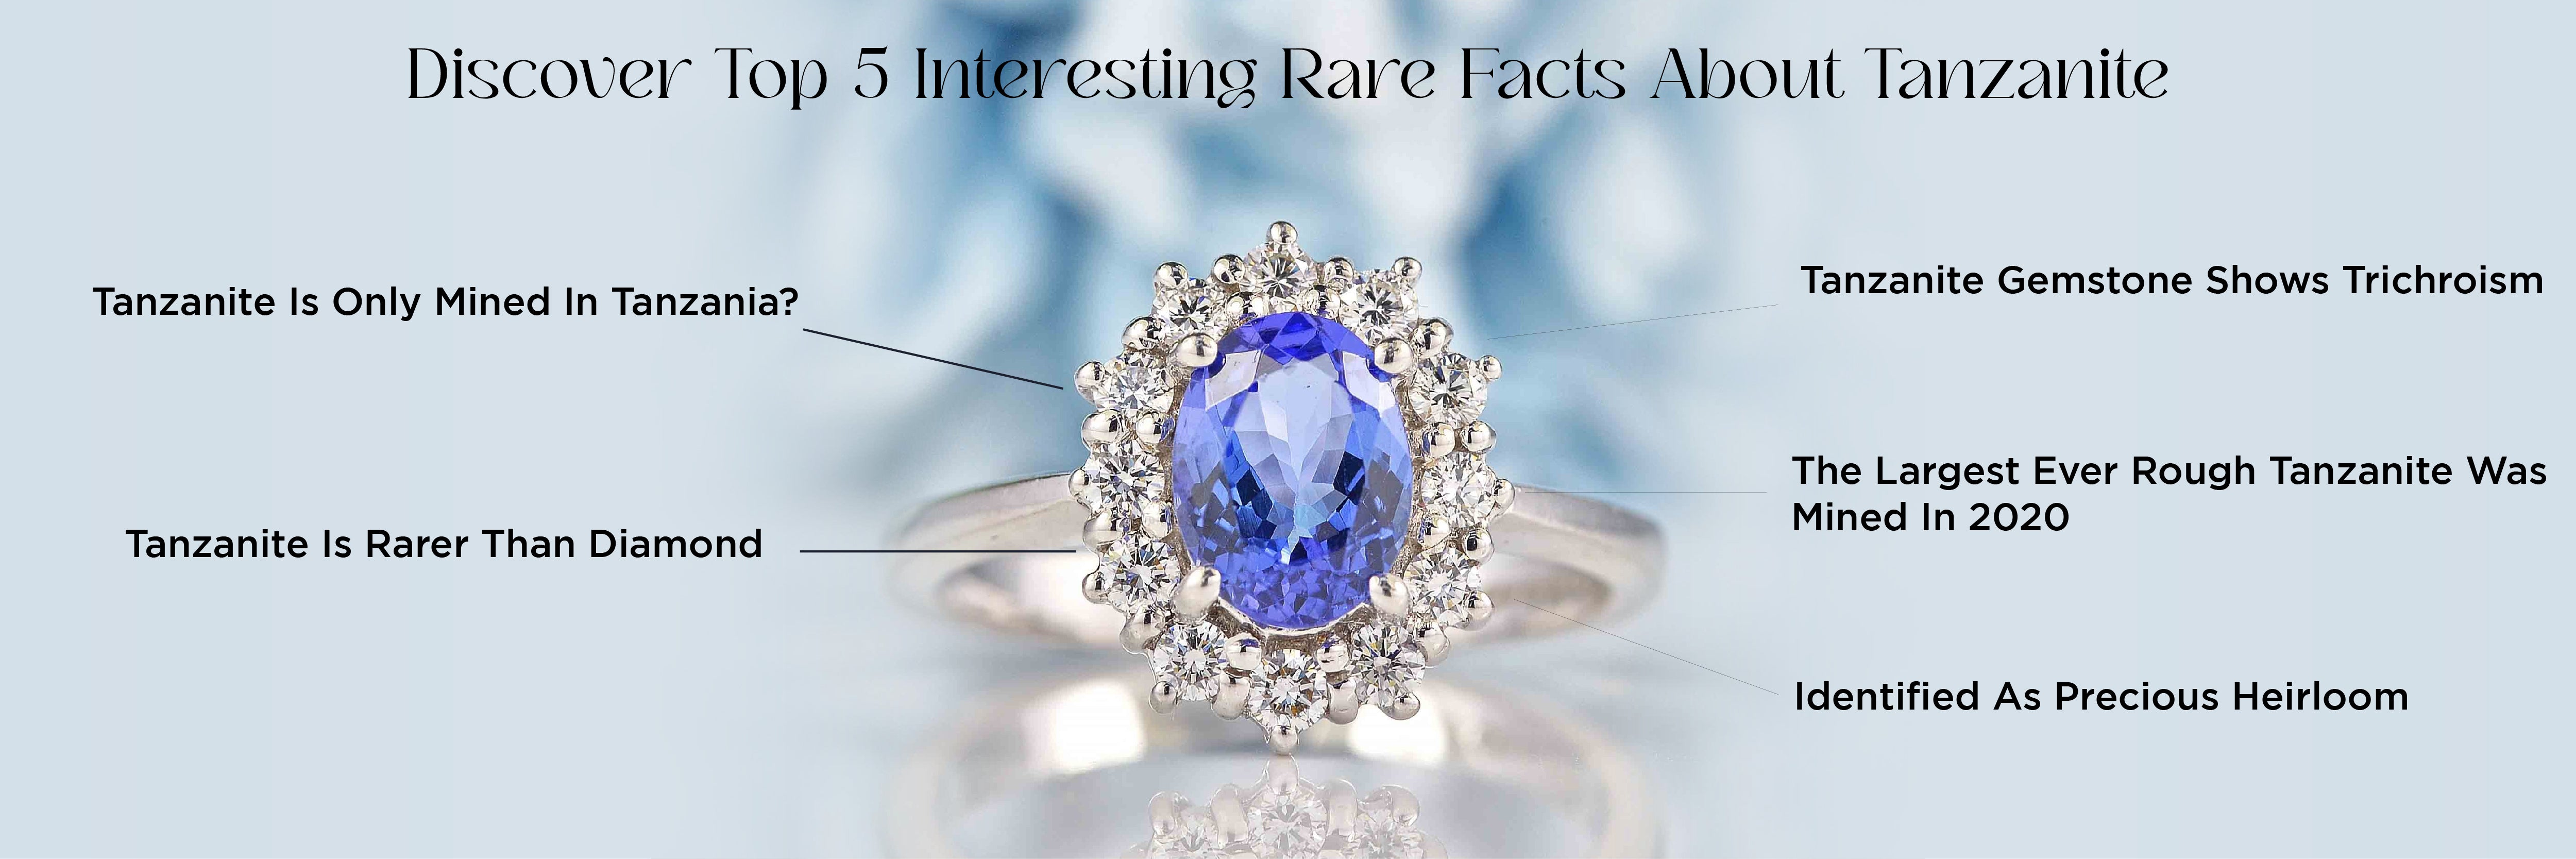 Discover Top 5 Interesting Rare Facts About Tanzanite